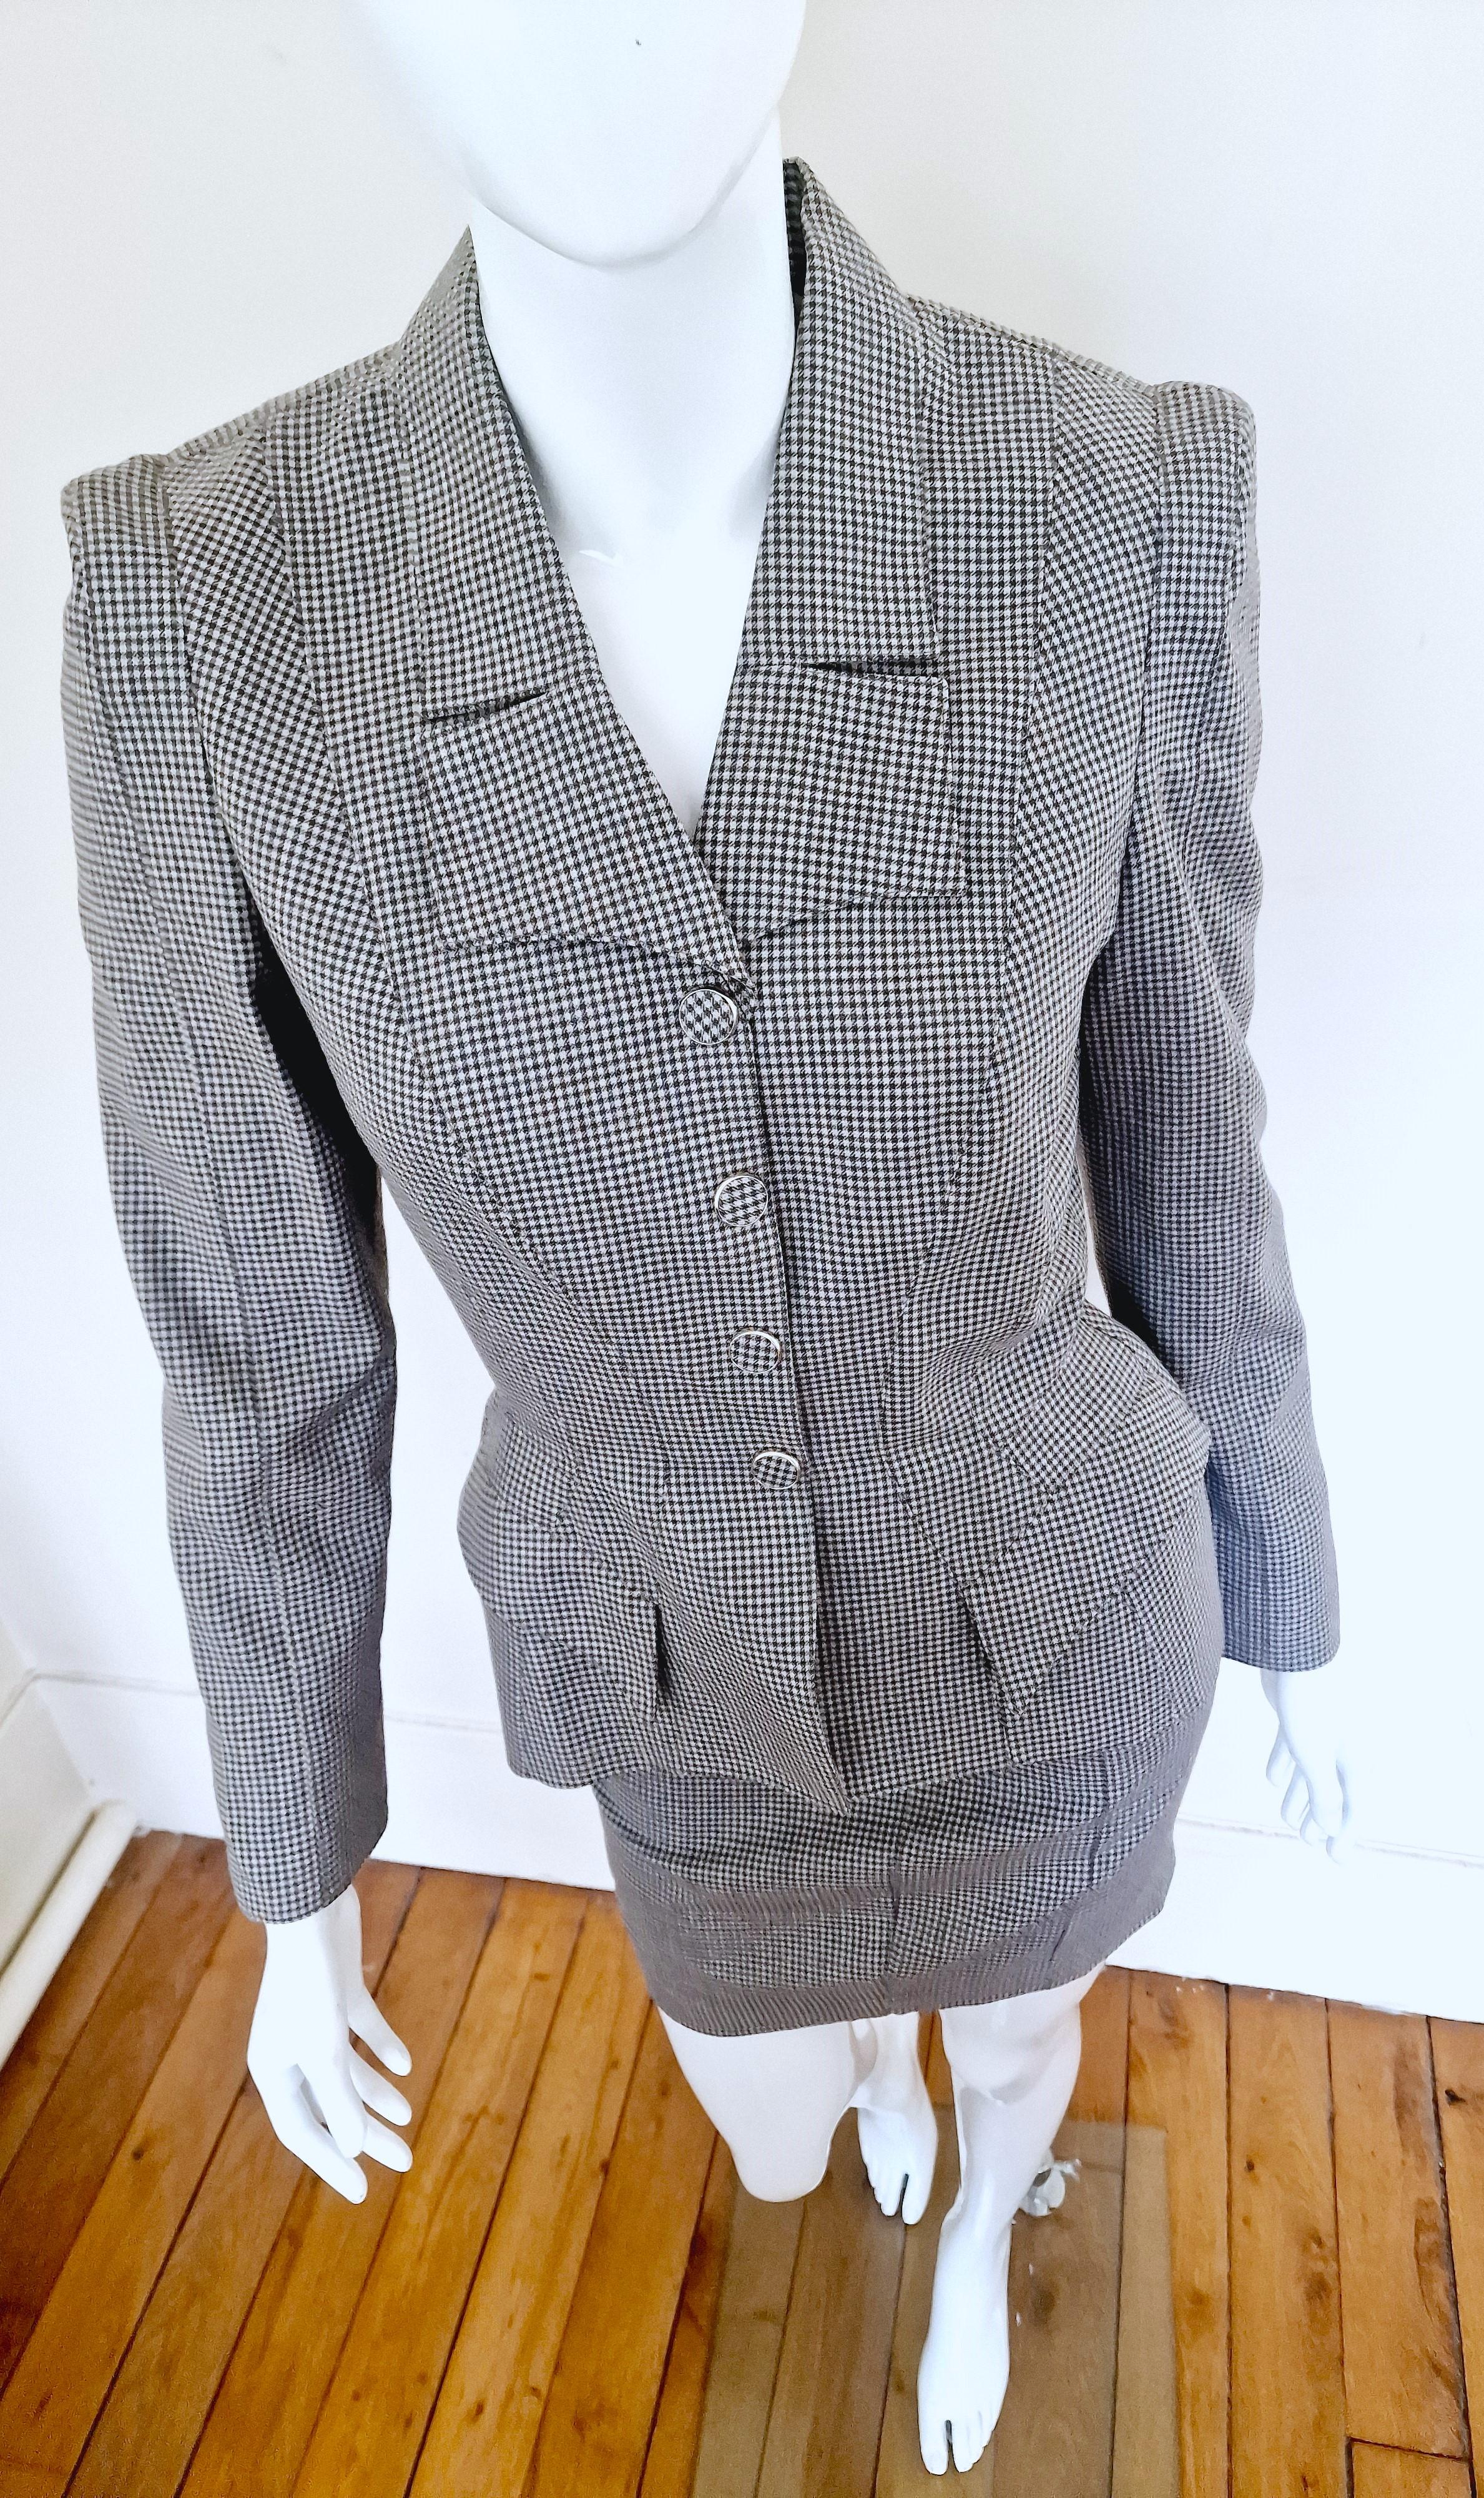 Thierry Mugler Houndstooth Check Evening Vampire XS Dress Set Jacket Skirt Suit For Sale 2